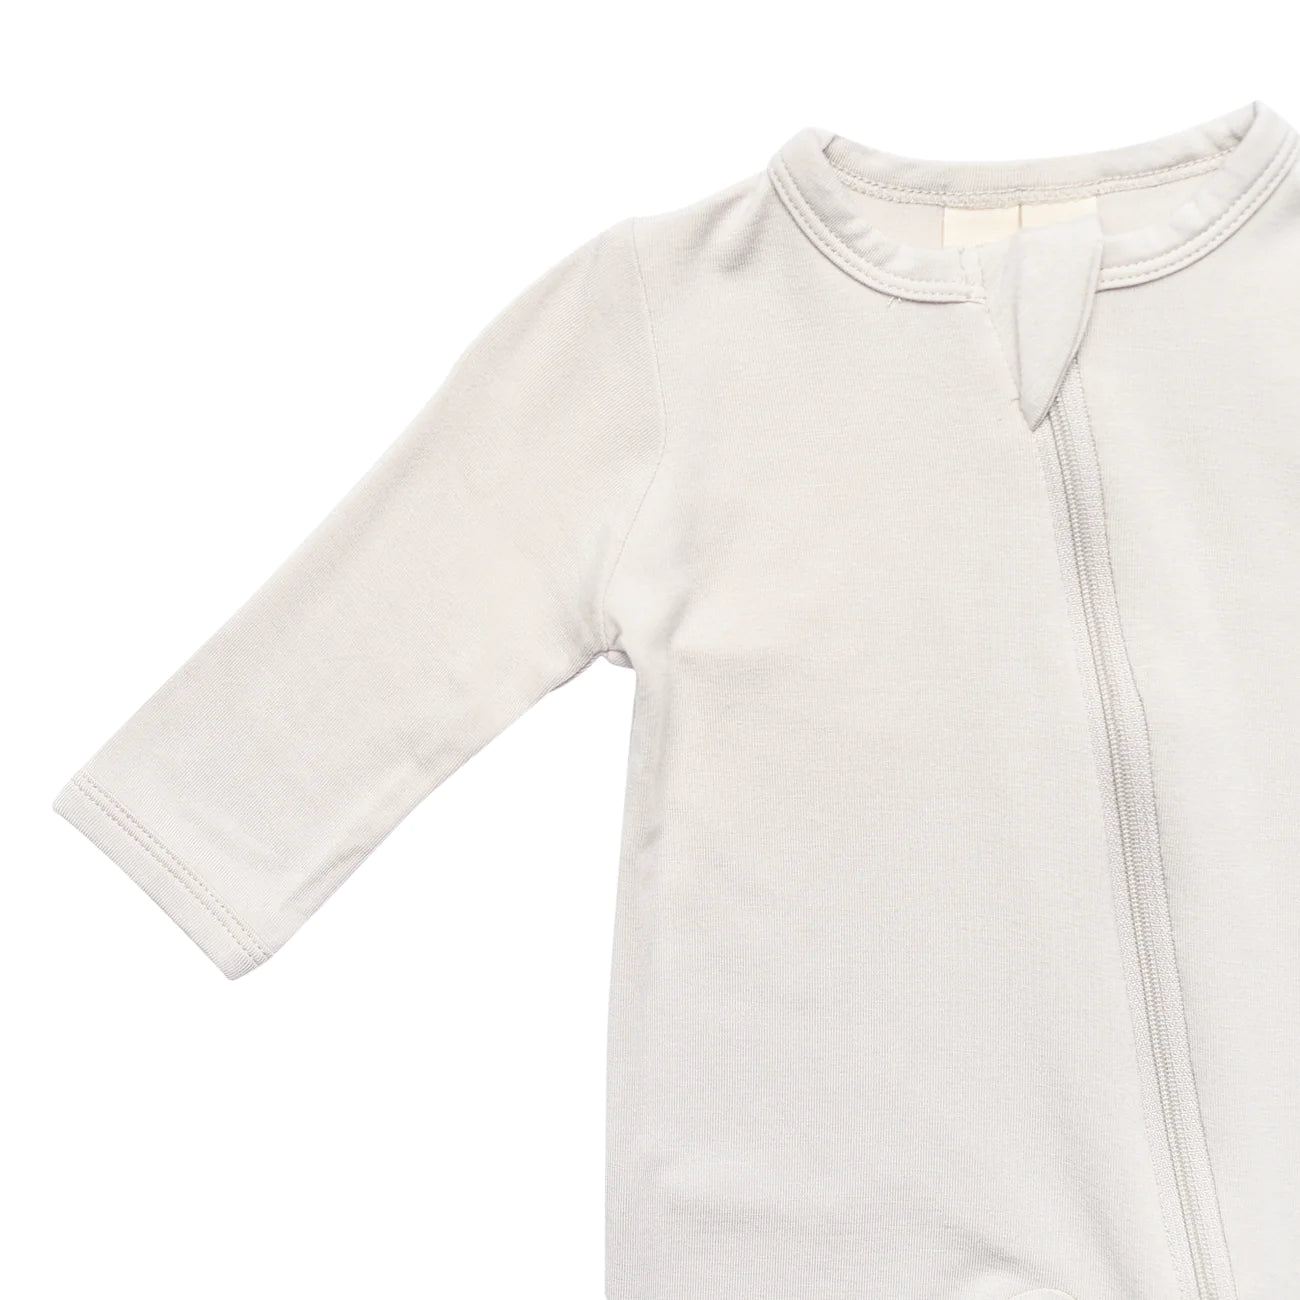 Bamboo Cotton Zippered Footie | Oat